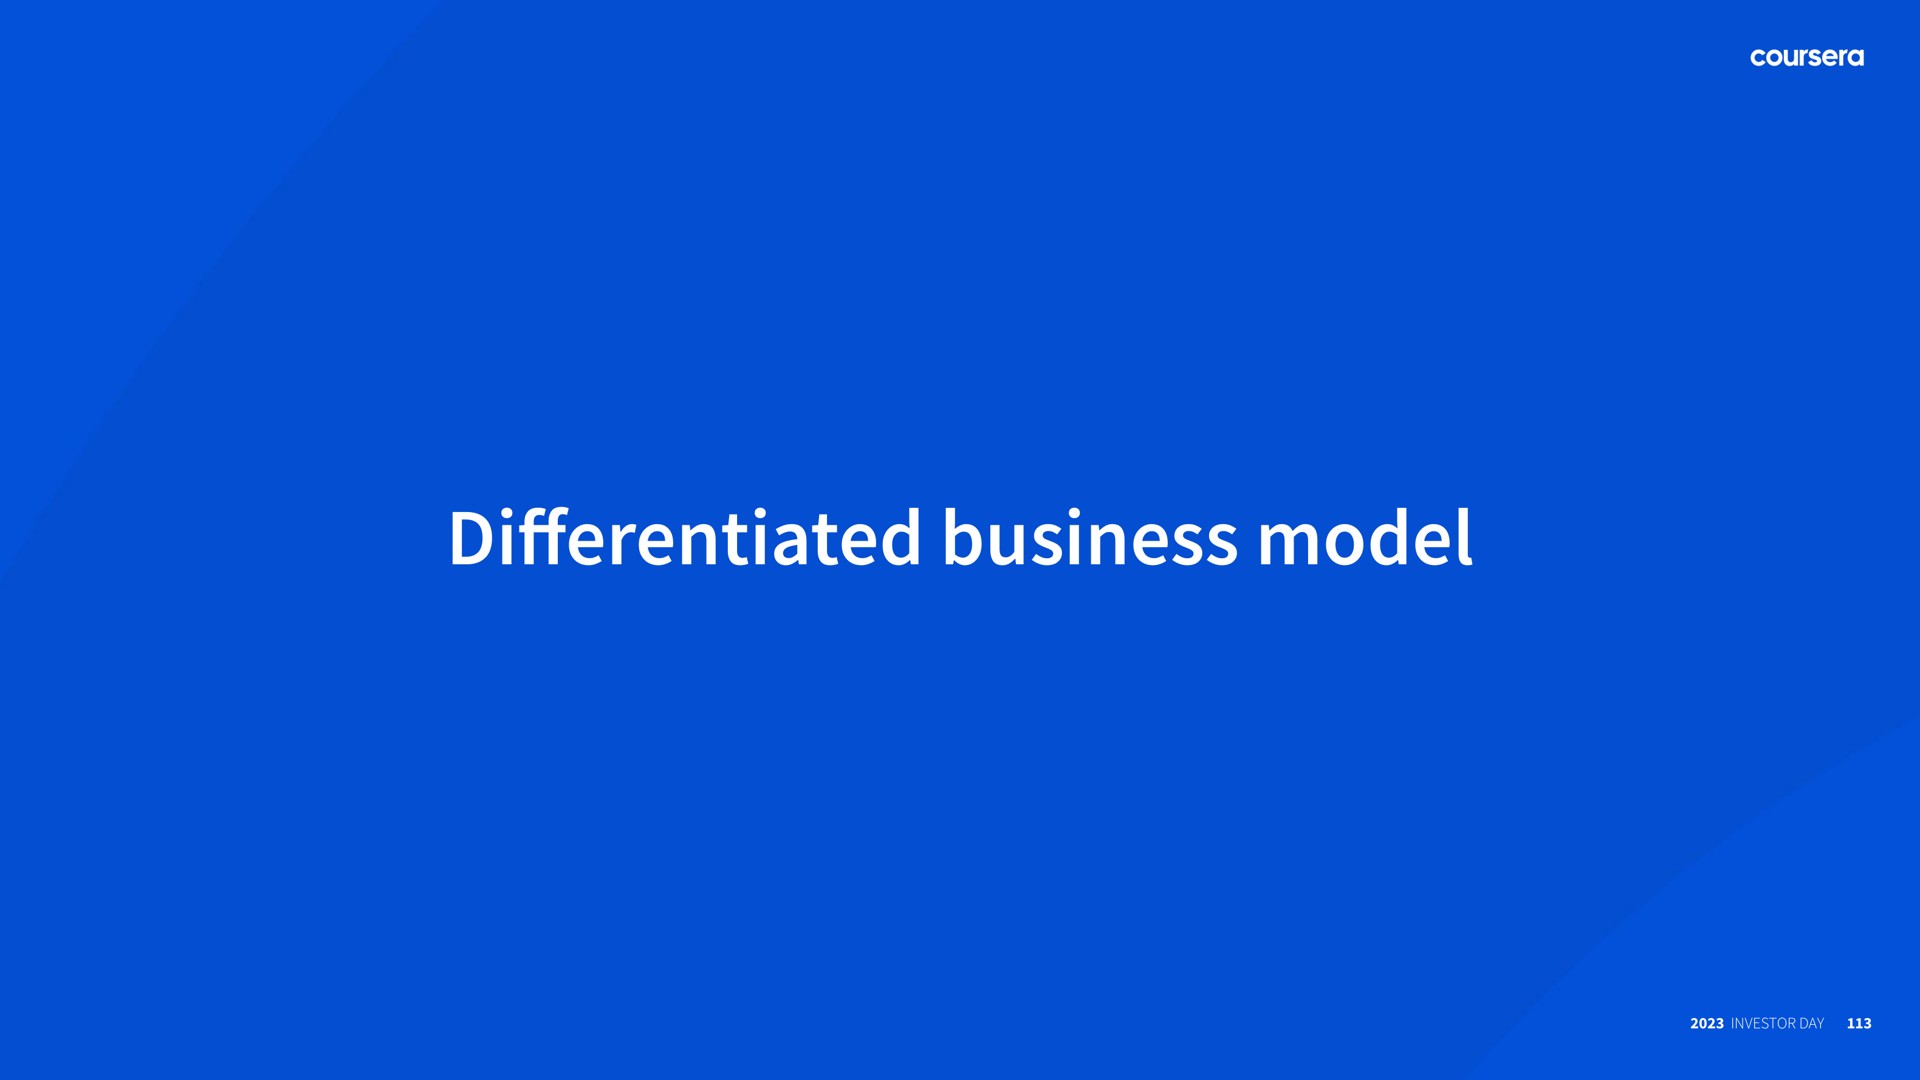 business model differentiated | Coursera